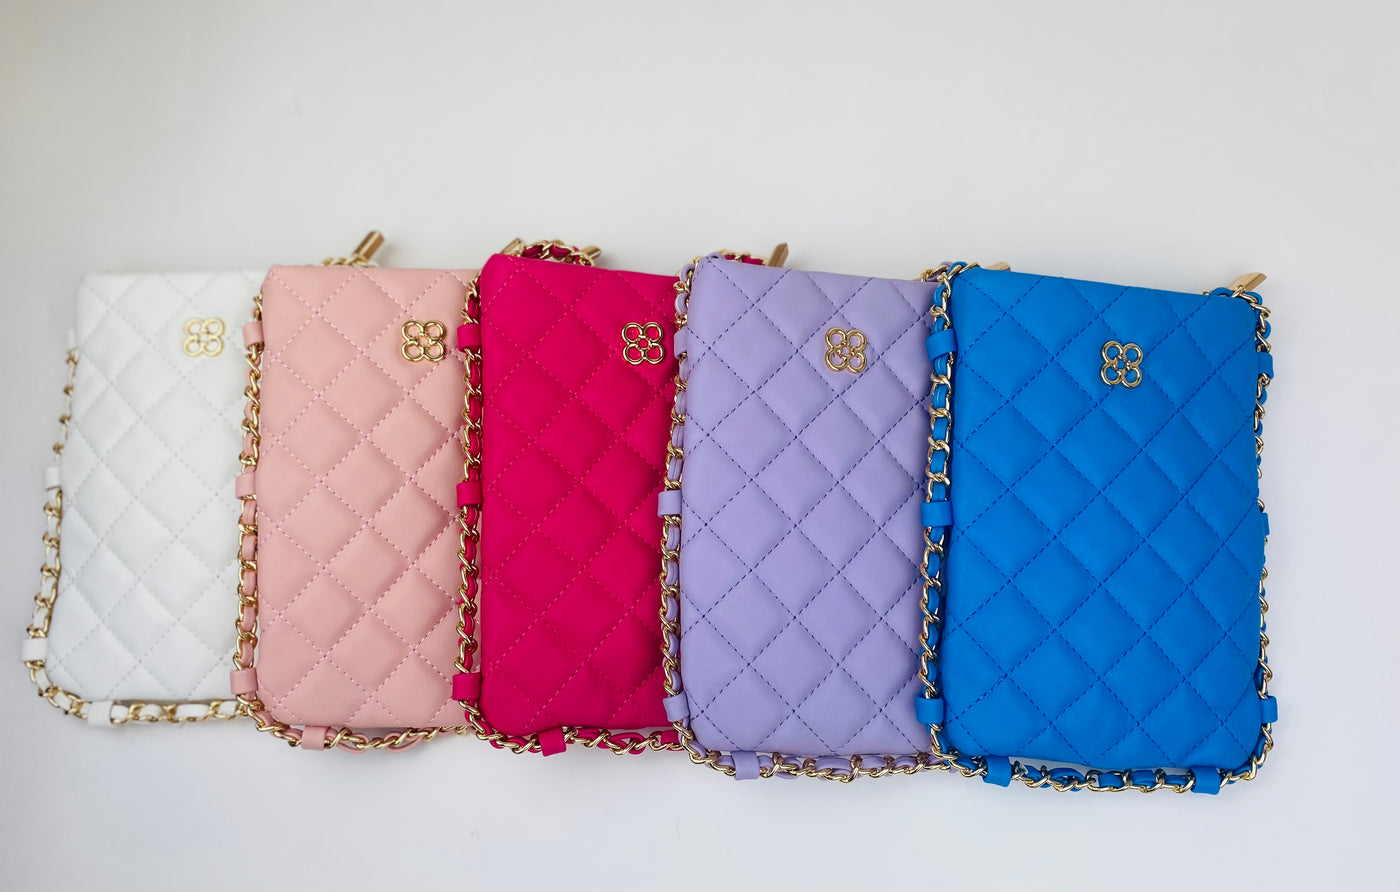 Gorgeous quilted "leatherette" cell phone bags